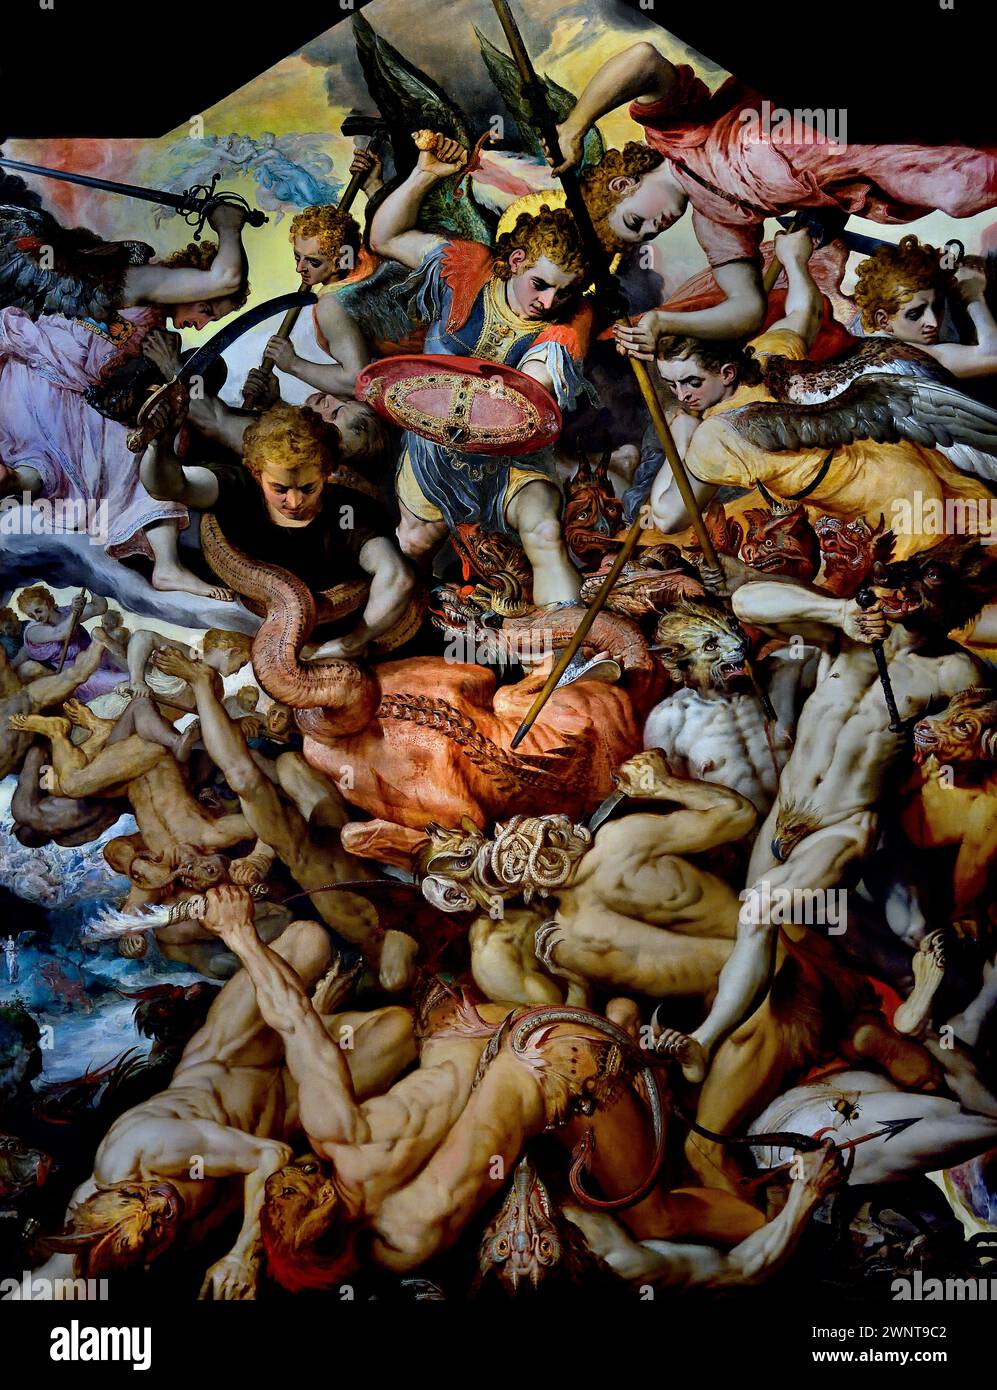 The Fall of the Rebel Angels 1554 Frans Floris I 1515-1570  Royal Museum of Fine Arts,  Antwerp, Belgium, Belgian. (  Biblical battle between good and evil. It’s a dense tangle of arms, legs, wings and tails. At the top, the angels loyal to God do battle with the Archangel Michael as their captain. ) Stock Photo